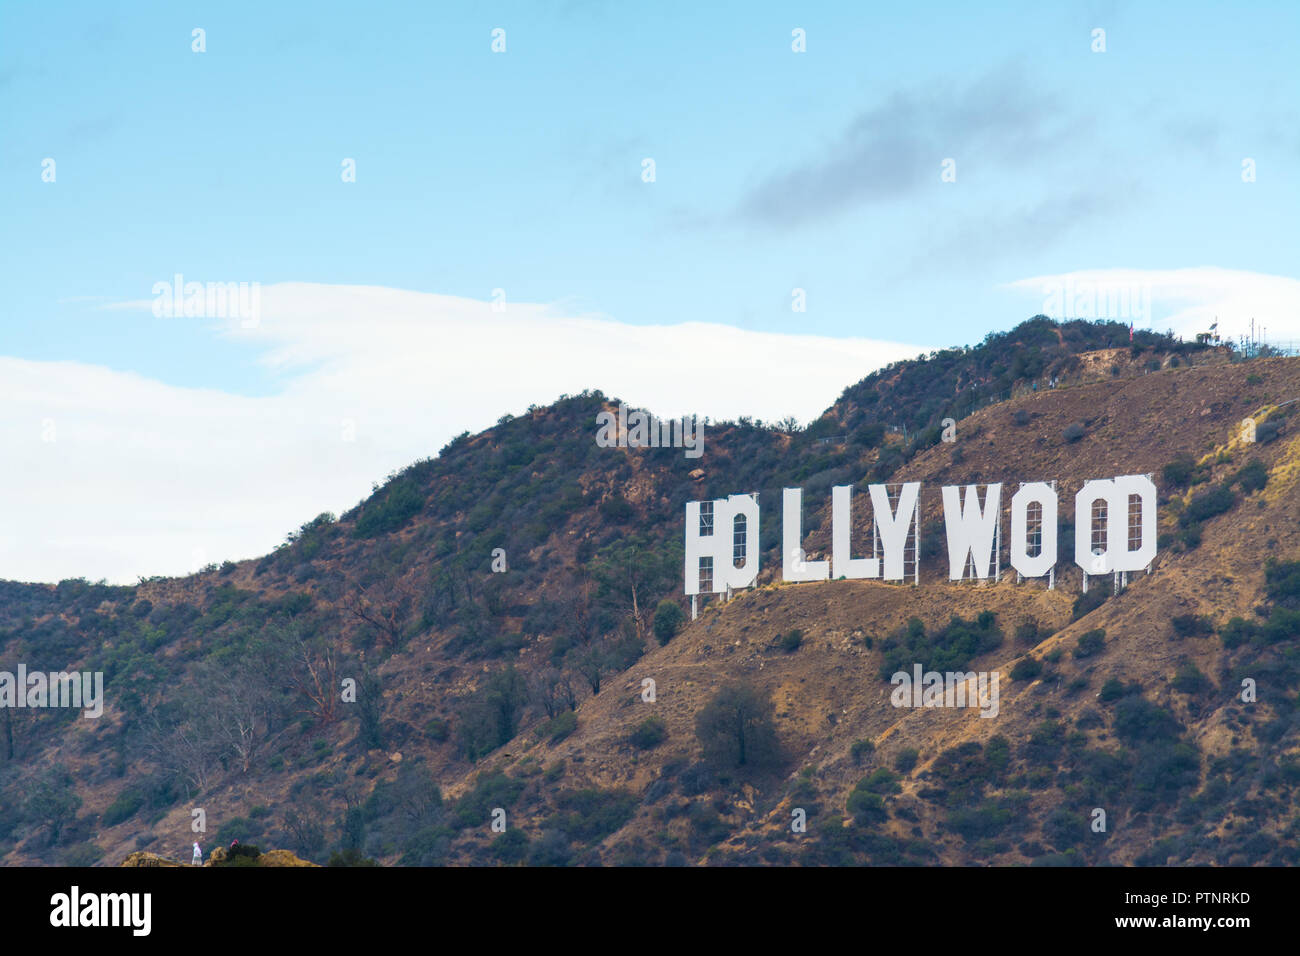 Los Angeles, CA, USA - October 28, 2016: Close up of Hollywood sign on a cloudy day Stock Photo